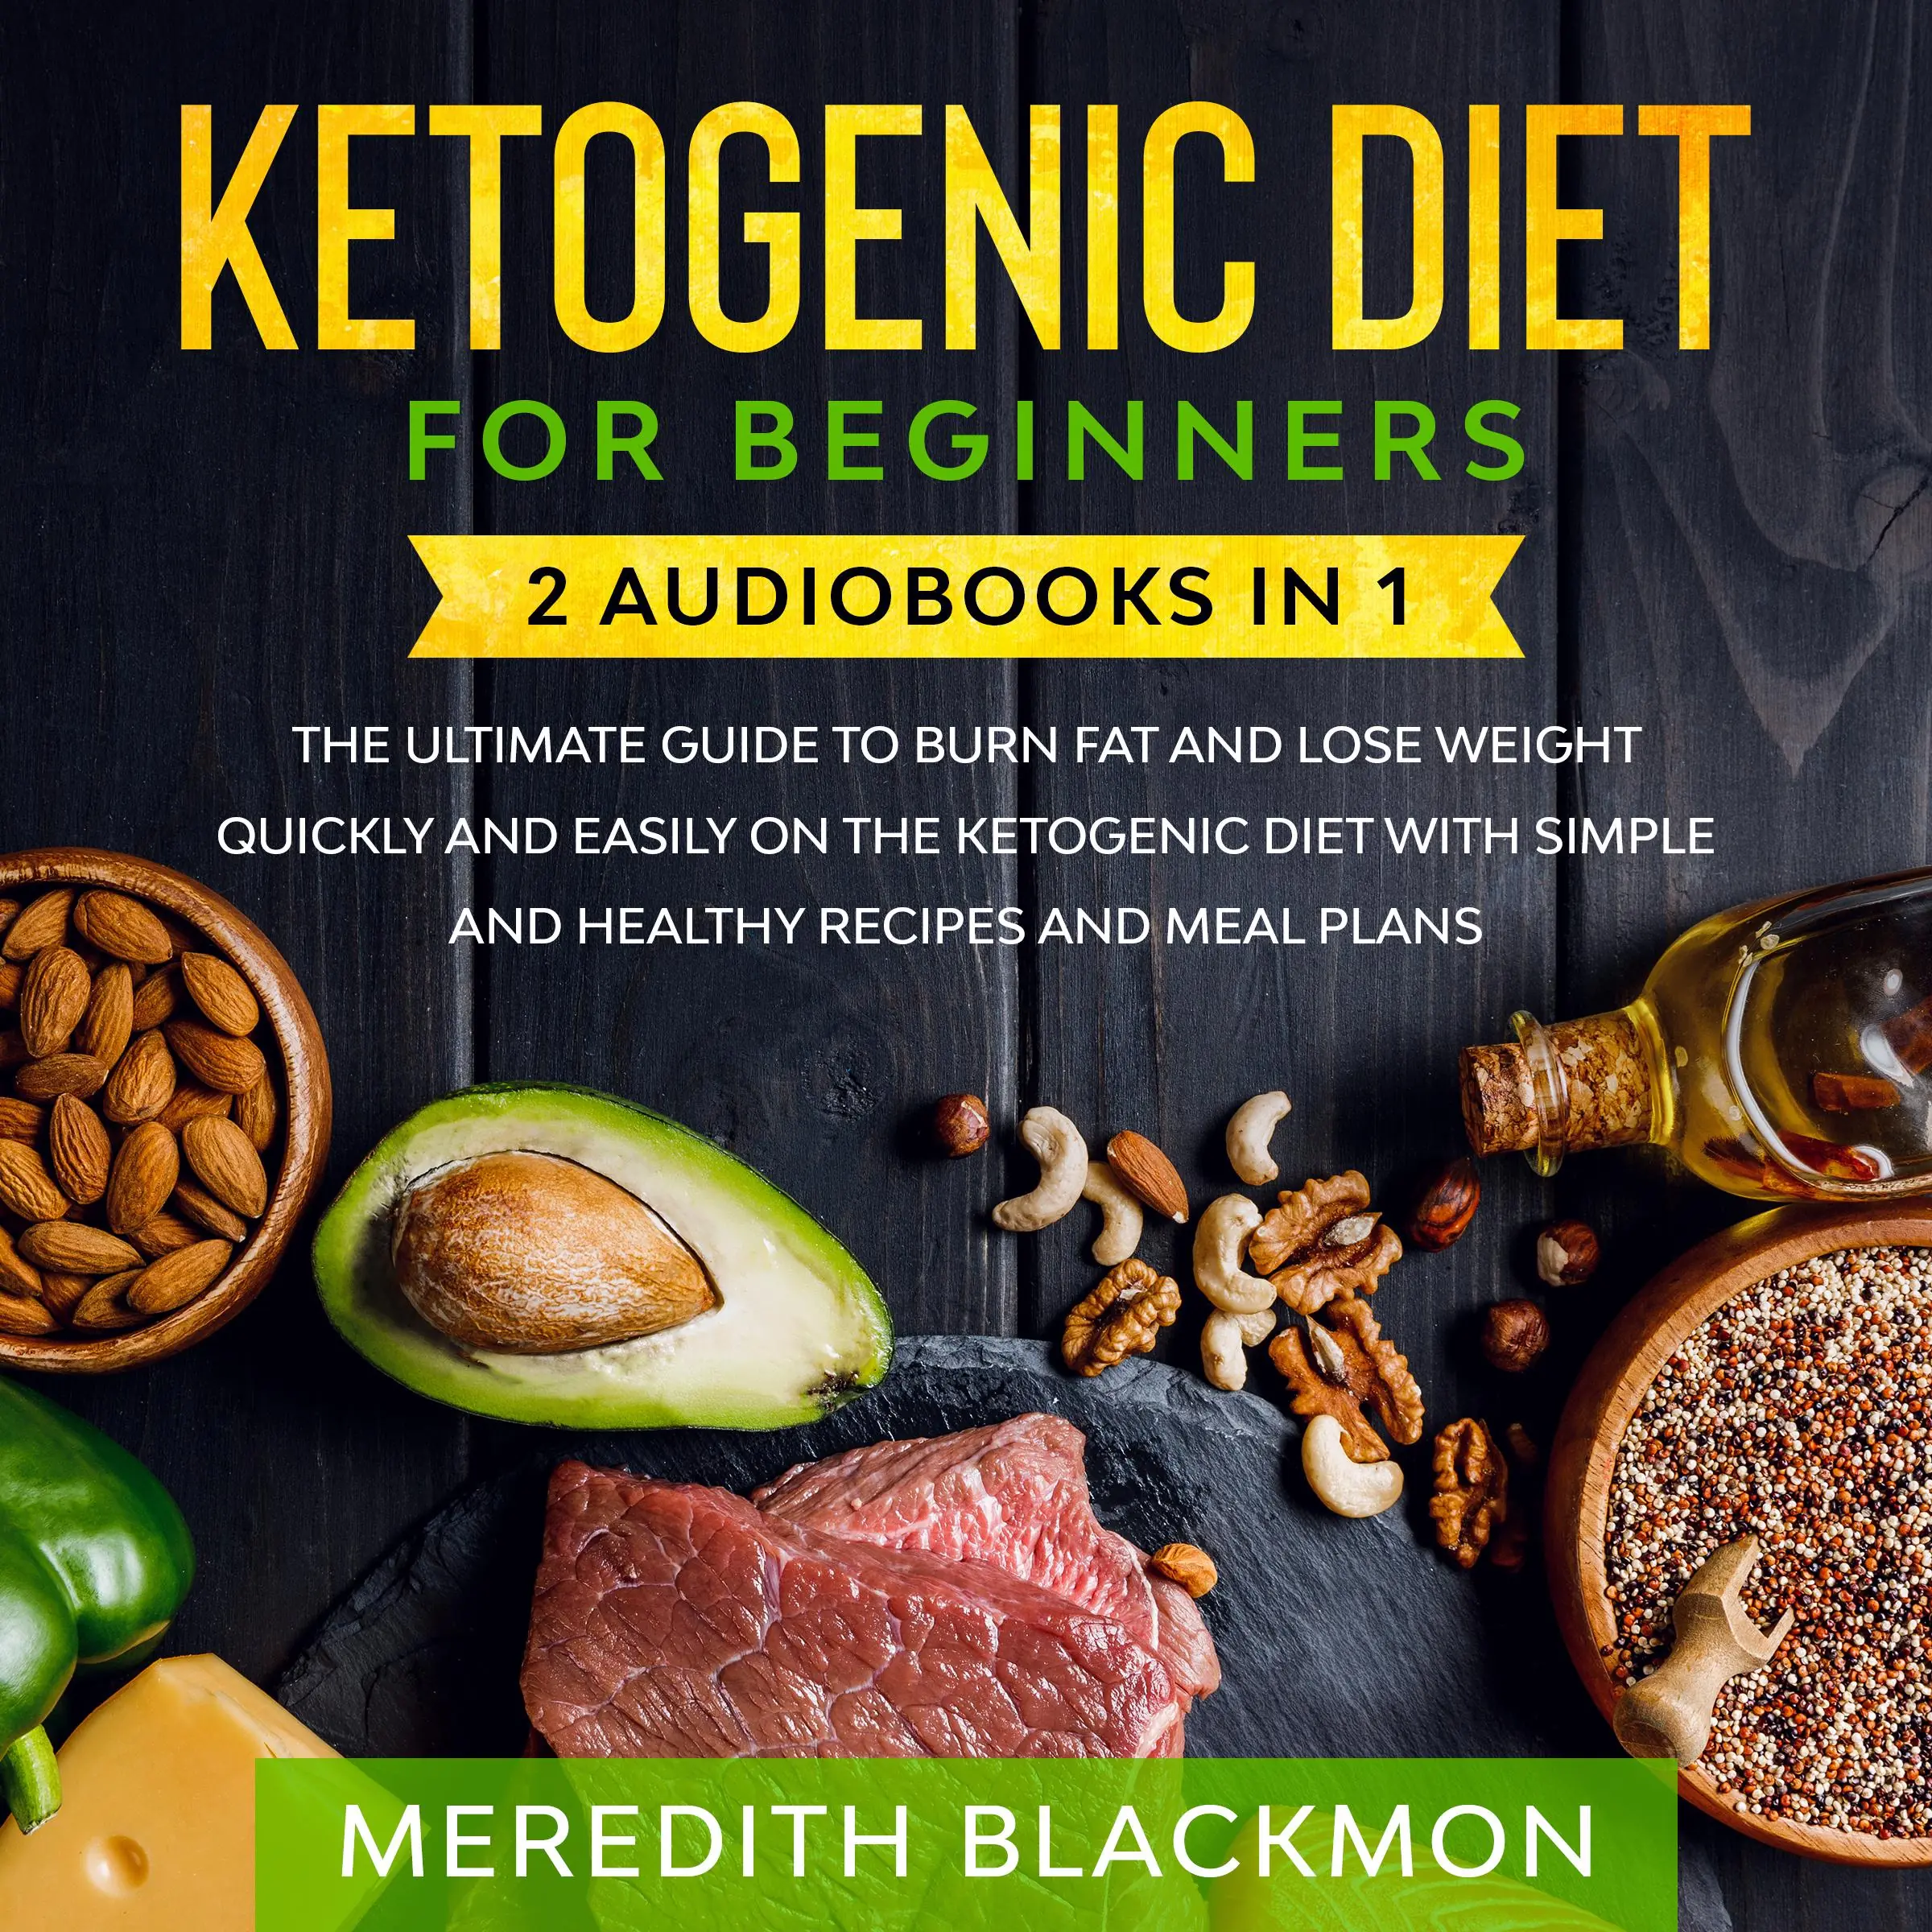 Ketogenic Diet for Beginners: 2 audiobooks in 1 - The Ultimate Guide to Burn Fat and Lose Weight Quickly and Easily on the Ketogenic Diet with Simple and Healthy Recipes and Meal Plans Audiobook by Meredith Blackmon